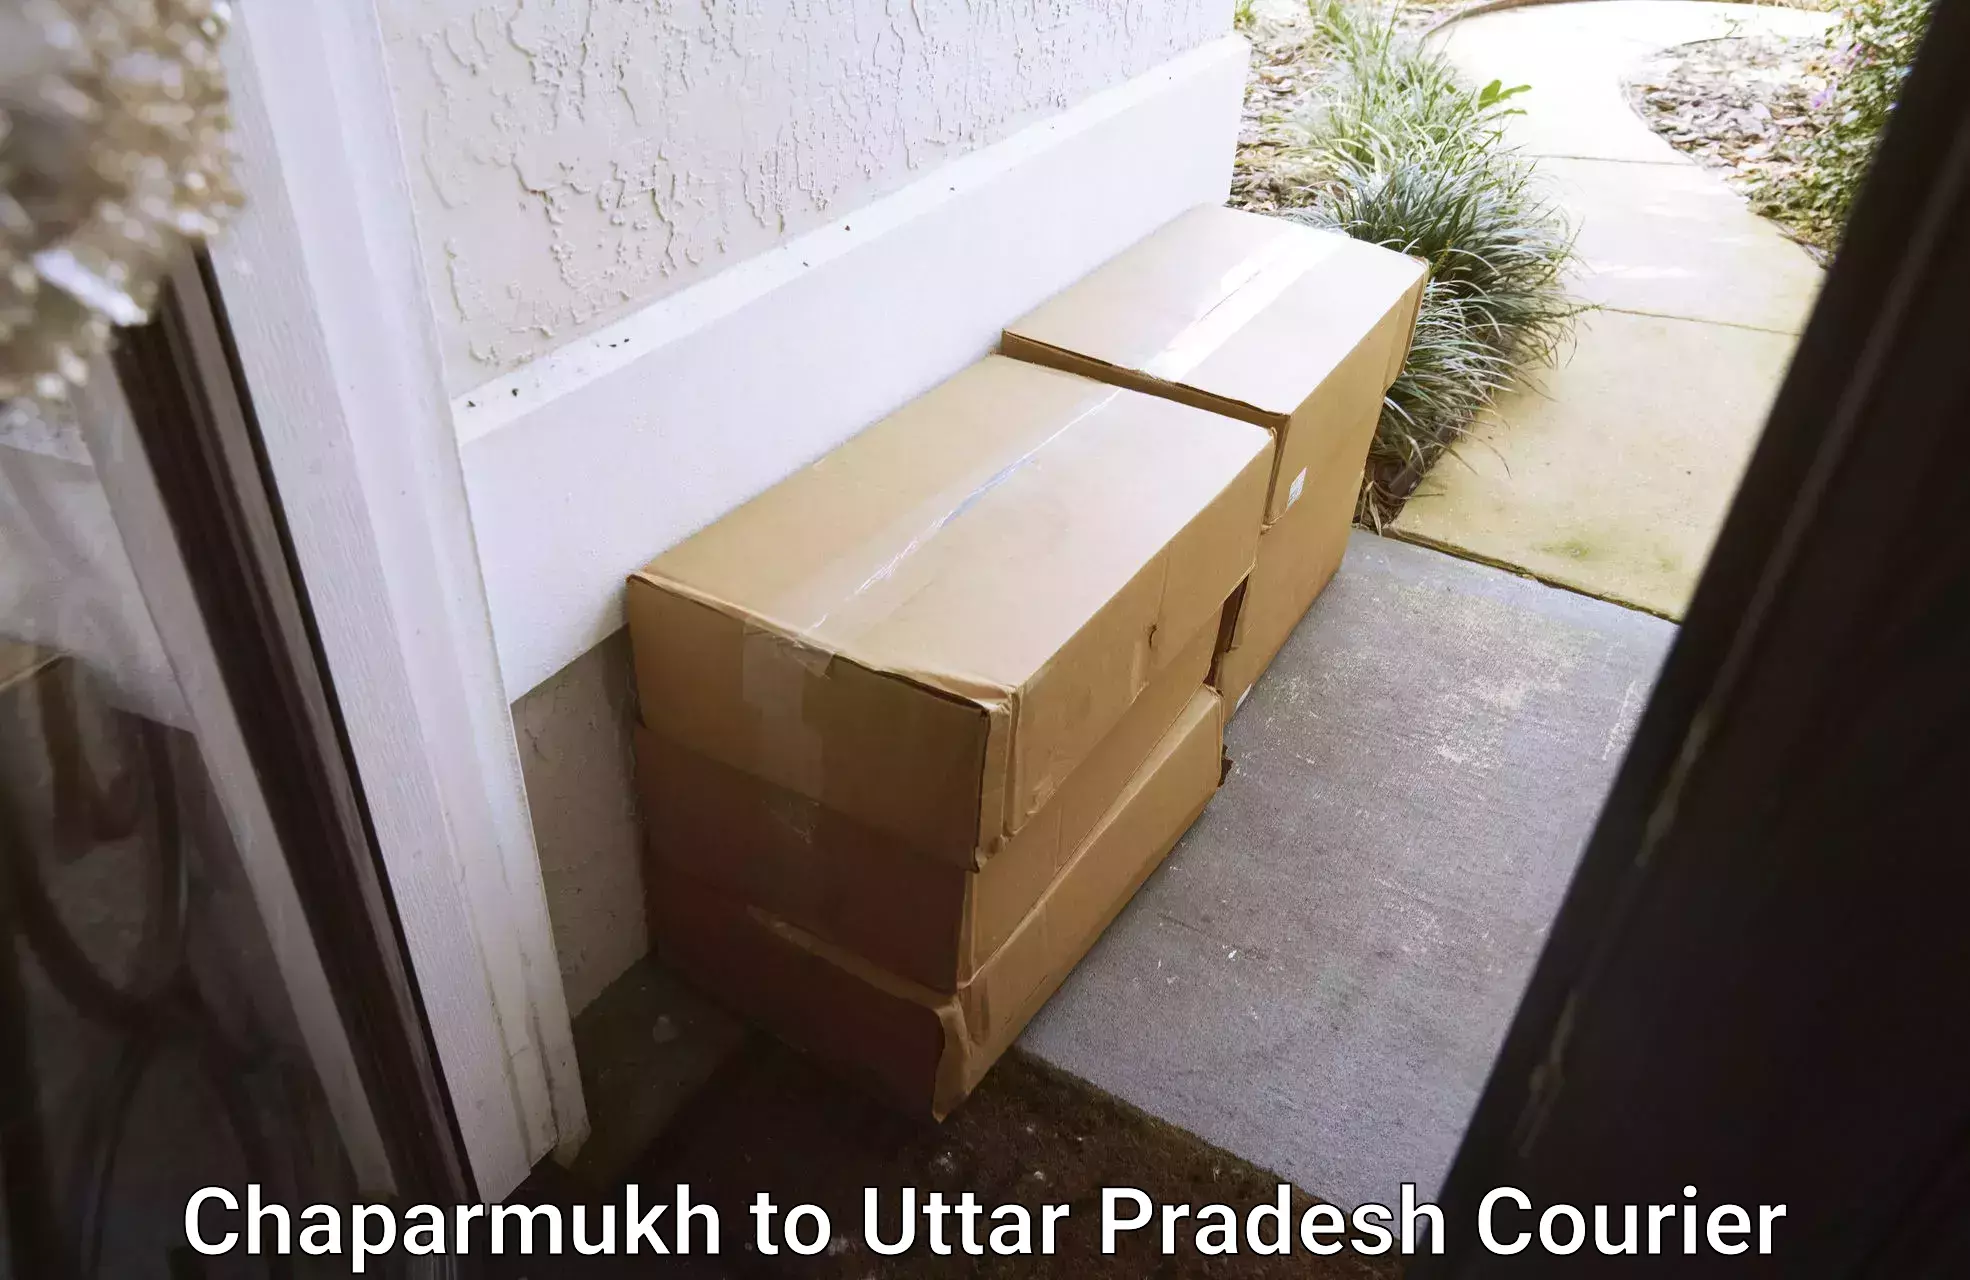 24-hour courier service in Chaparmukh to Allahabad